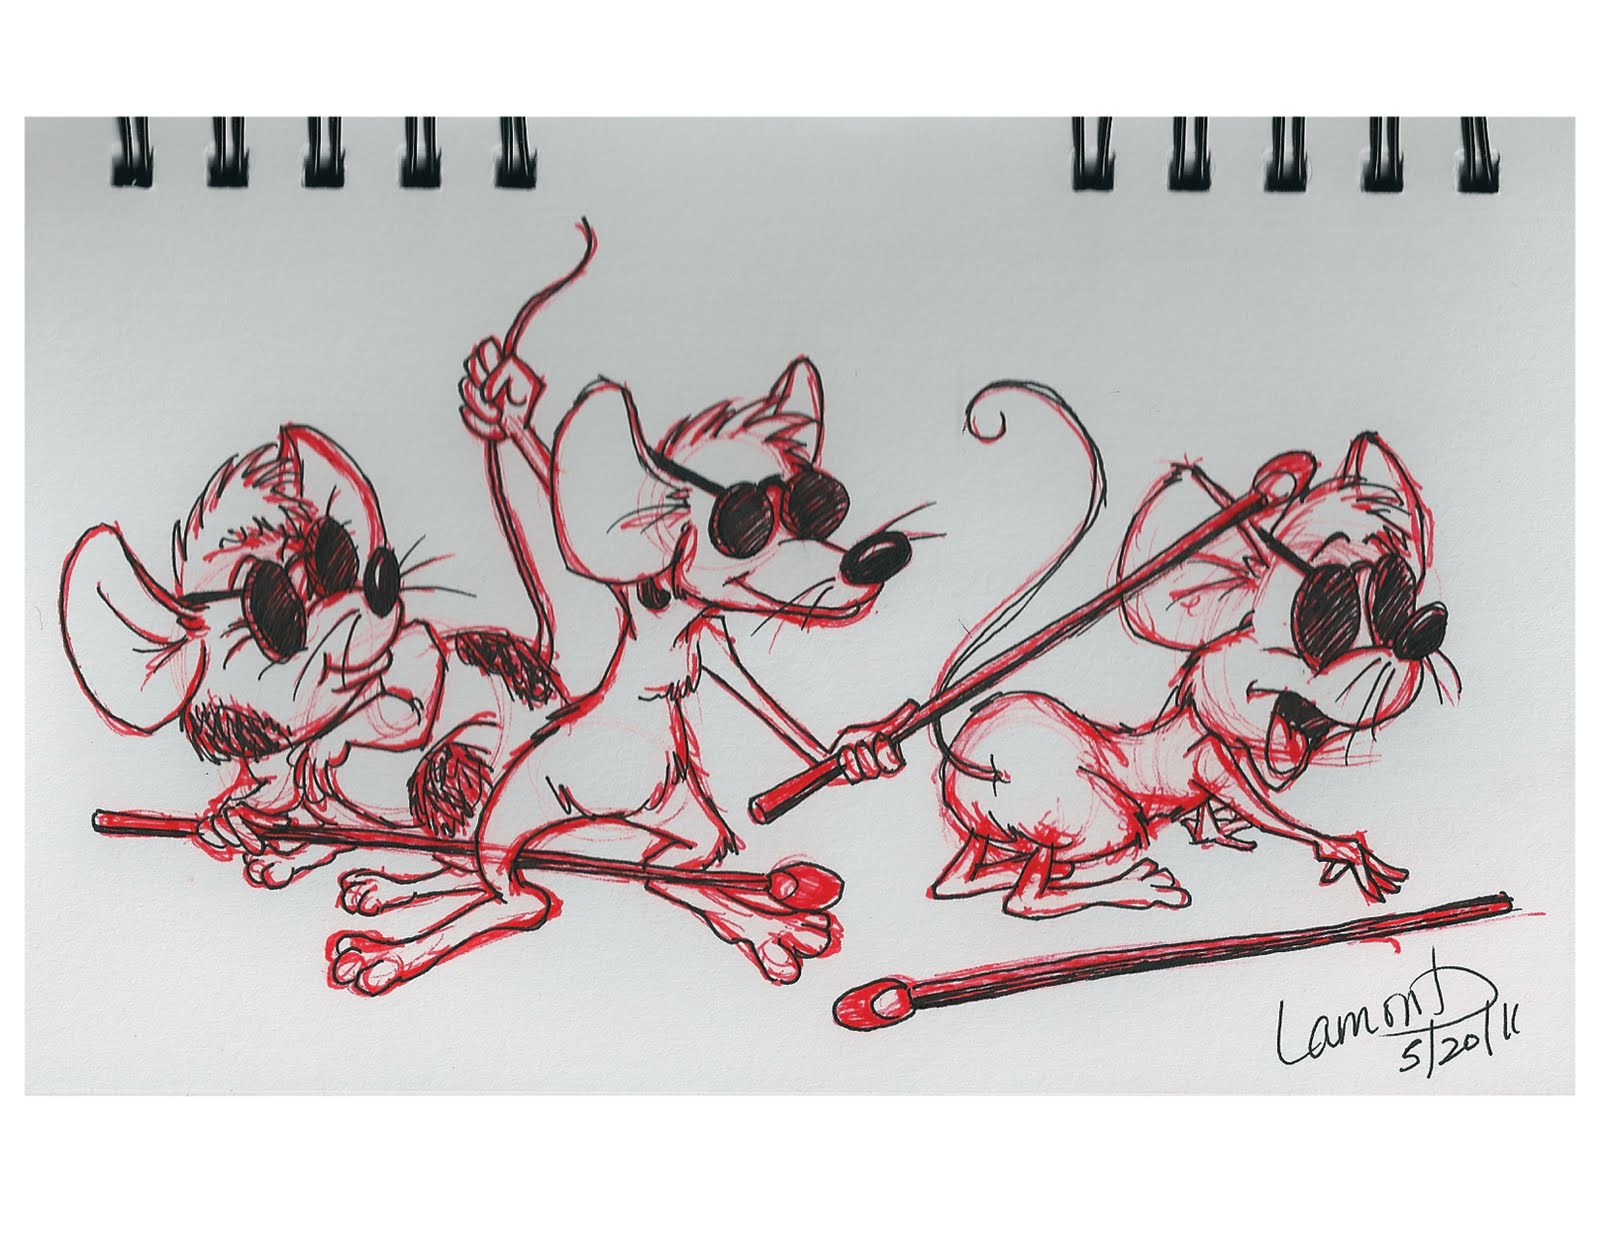 Lamont's Project 365: May 20 - Three Blind Mice